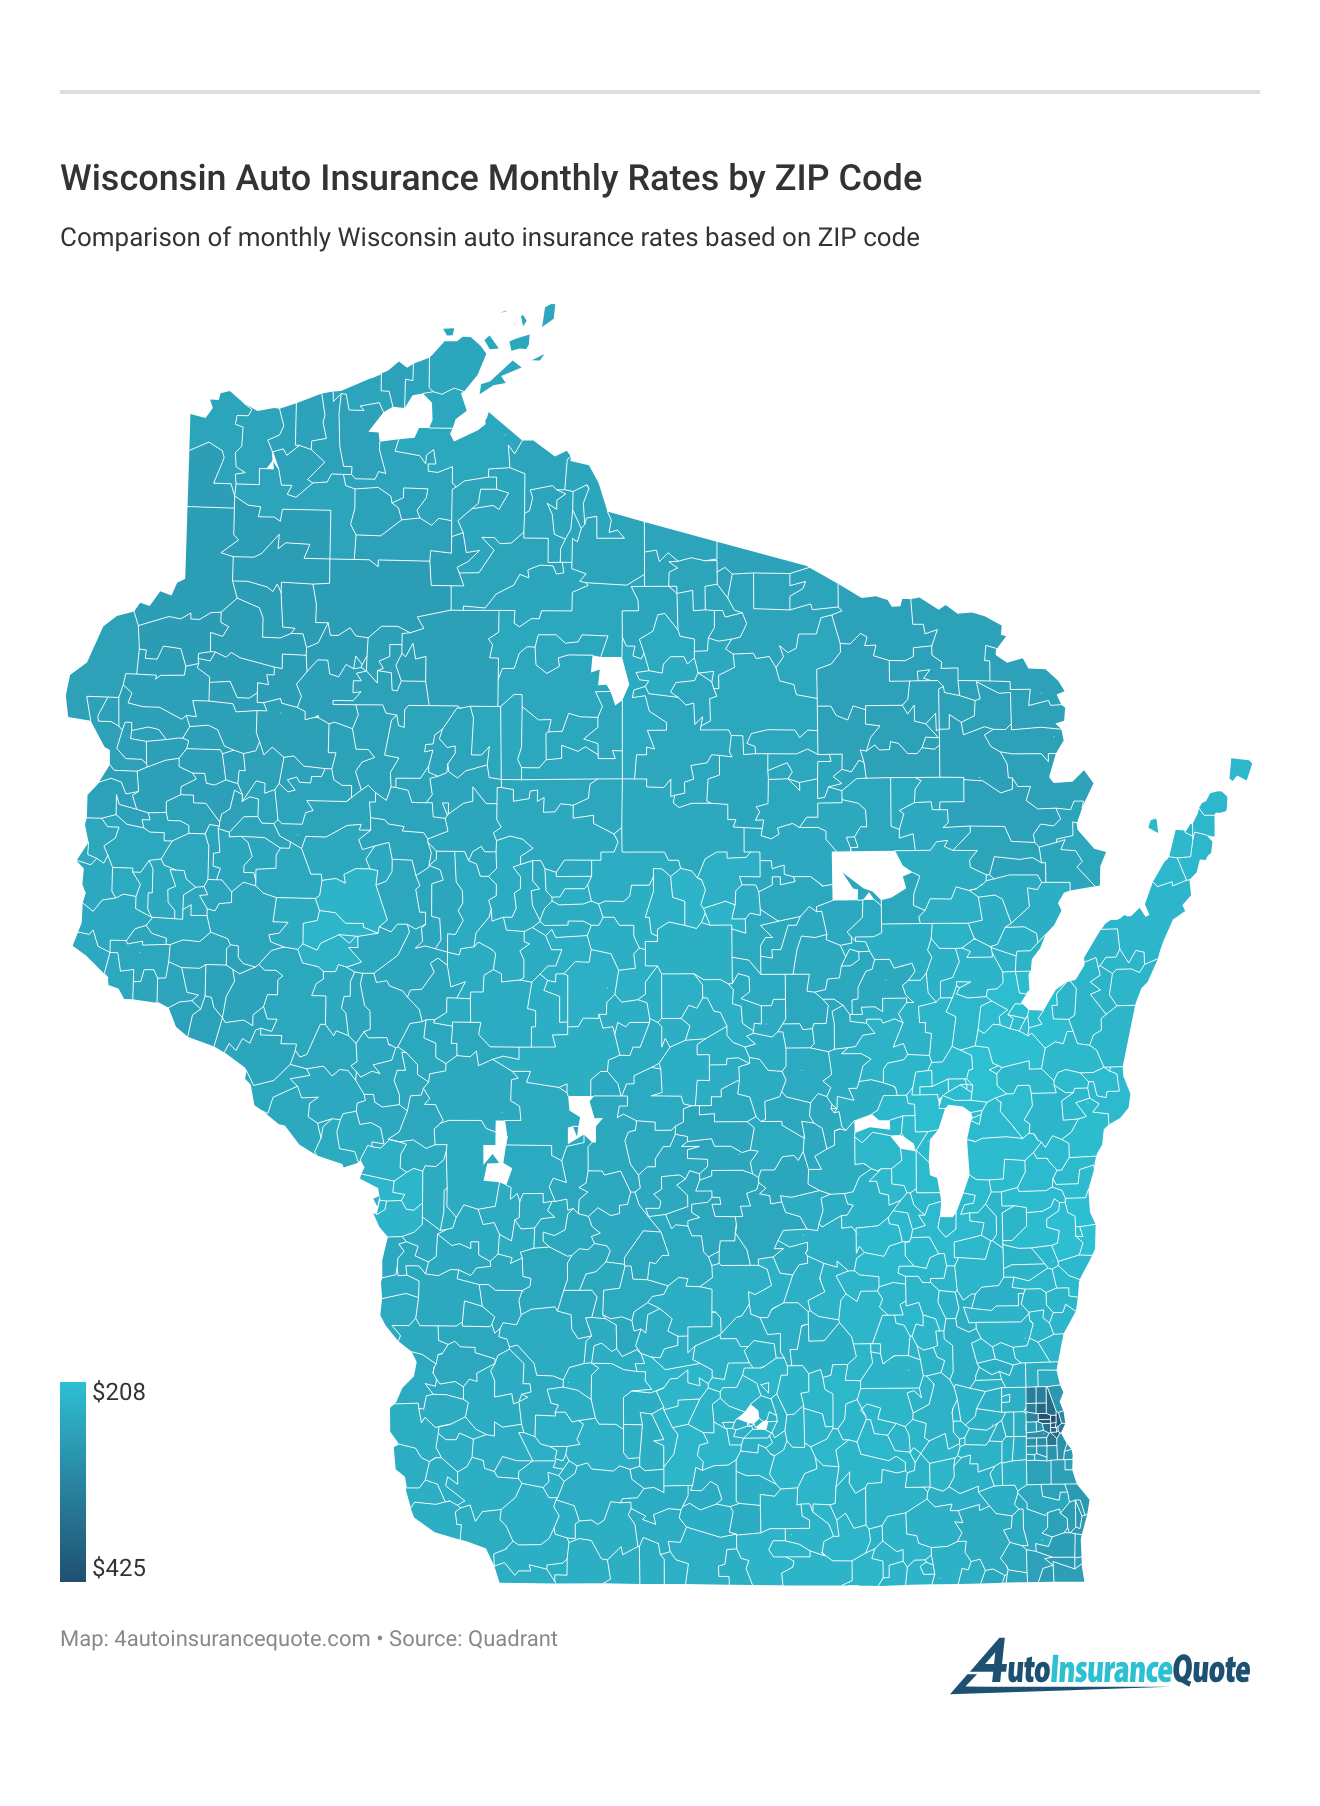 <h3>Wisconsin Auto Insurance Monthly Rates by ZIP Code</h3>